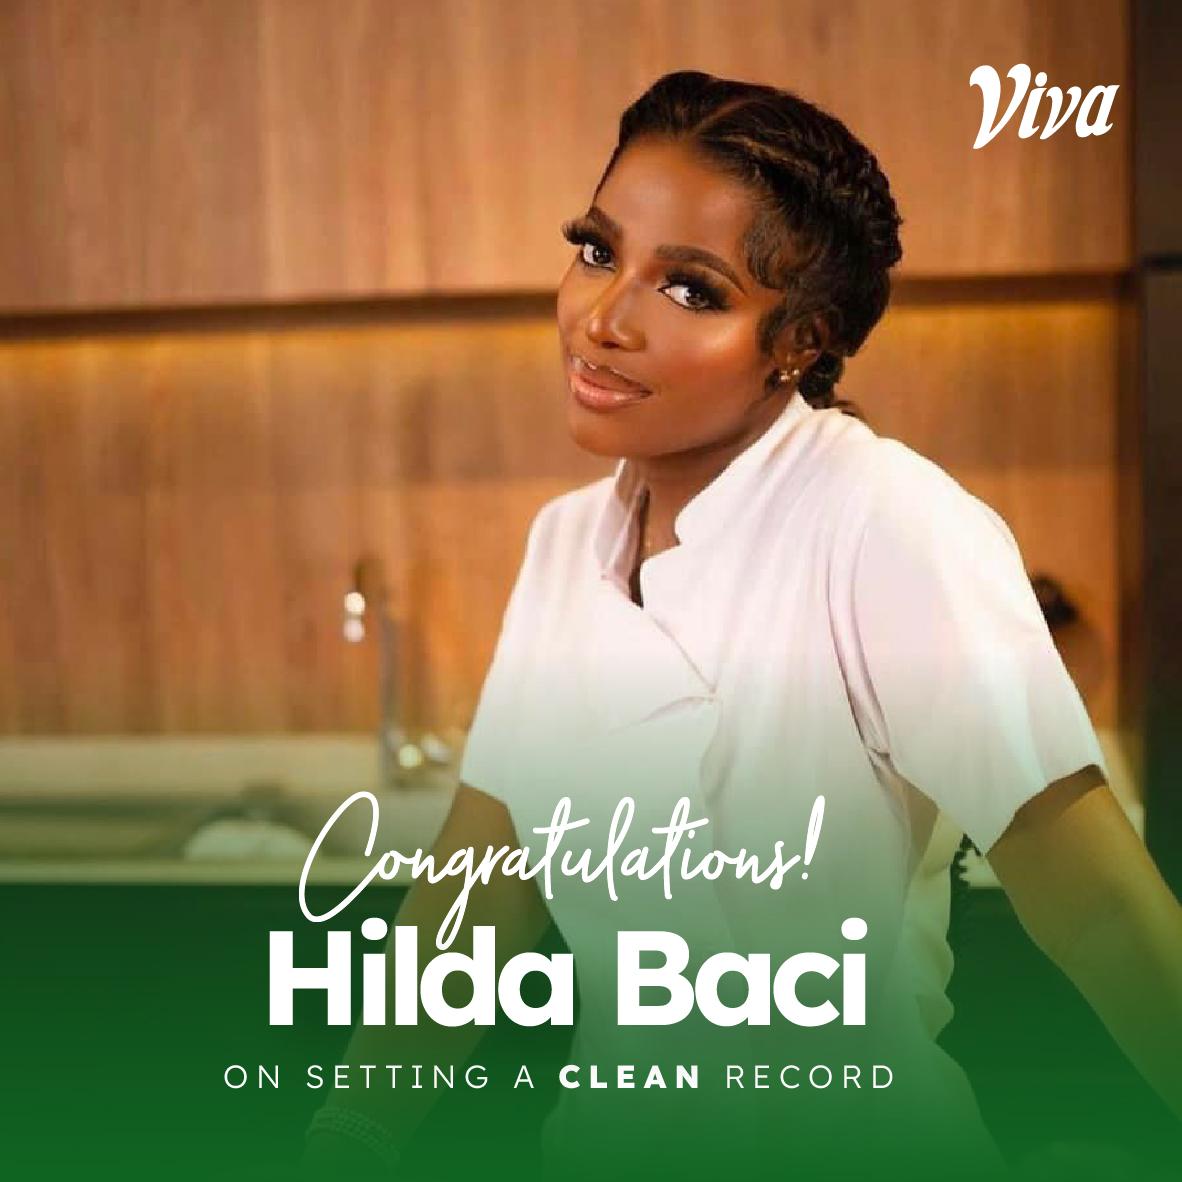 Hilda Baci’s Partnered with Viva Dishwash as the Official Dishwash of the Historic Cook-a-Thon Event